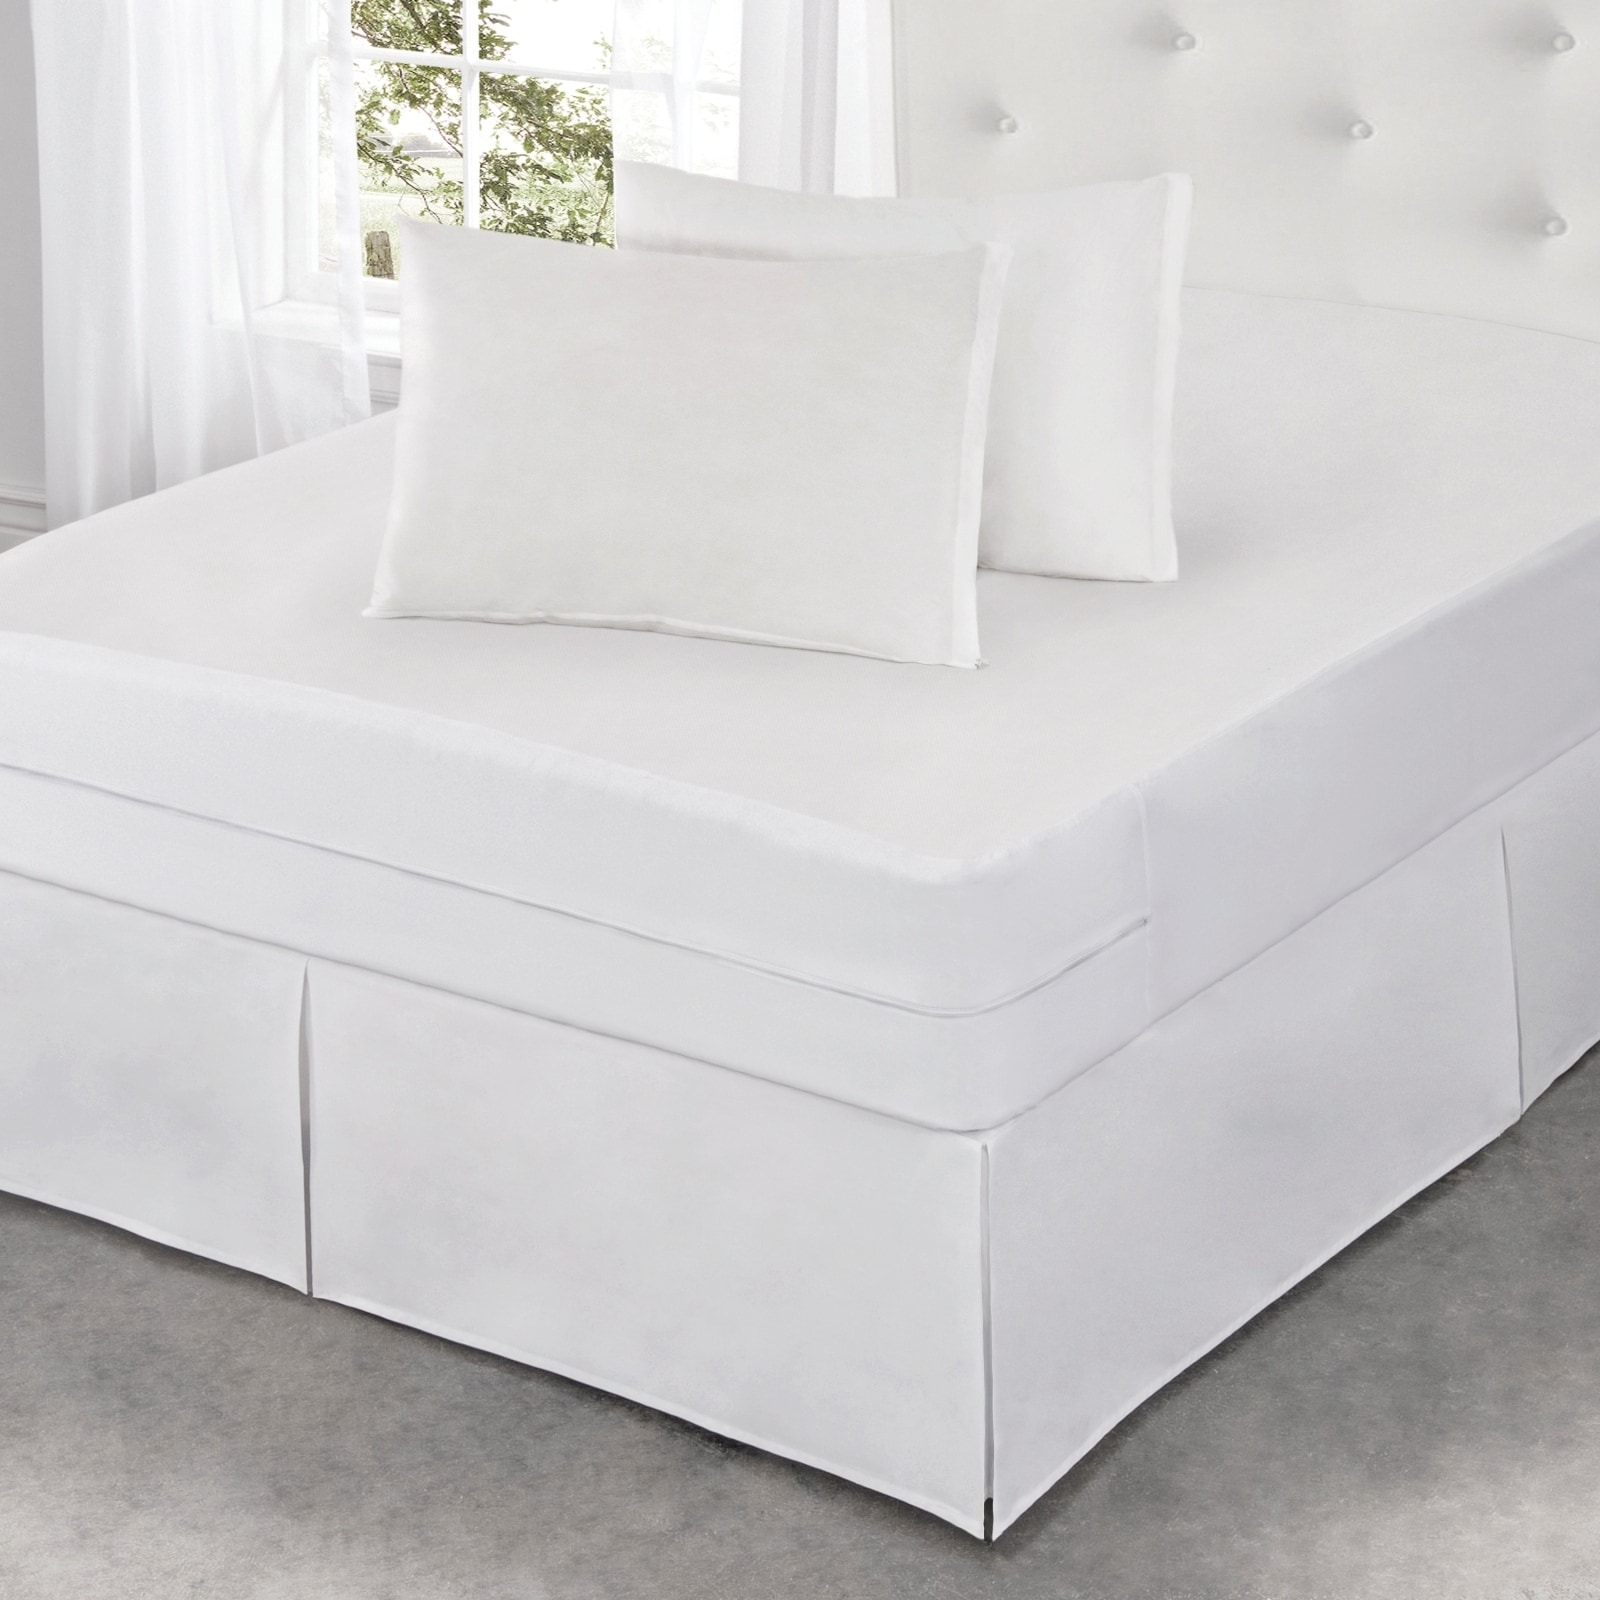 Linenspa Essentials Twin Jersey Polyester Waterproof, Allergen, and Dust Mite Protection 5-Sided Mattress Protector, White